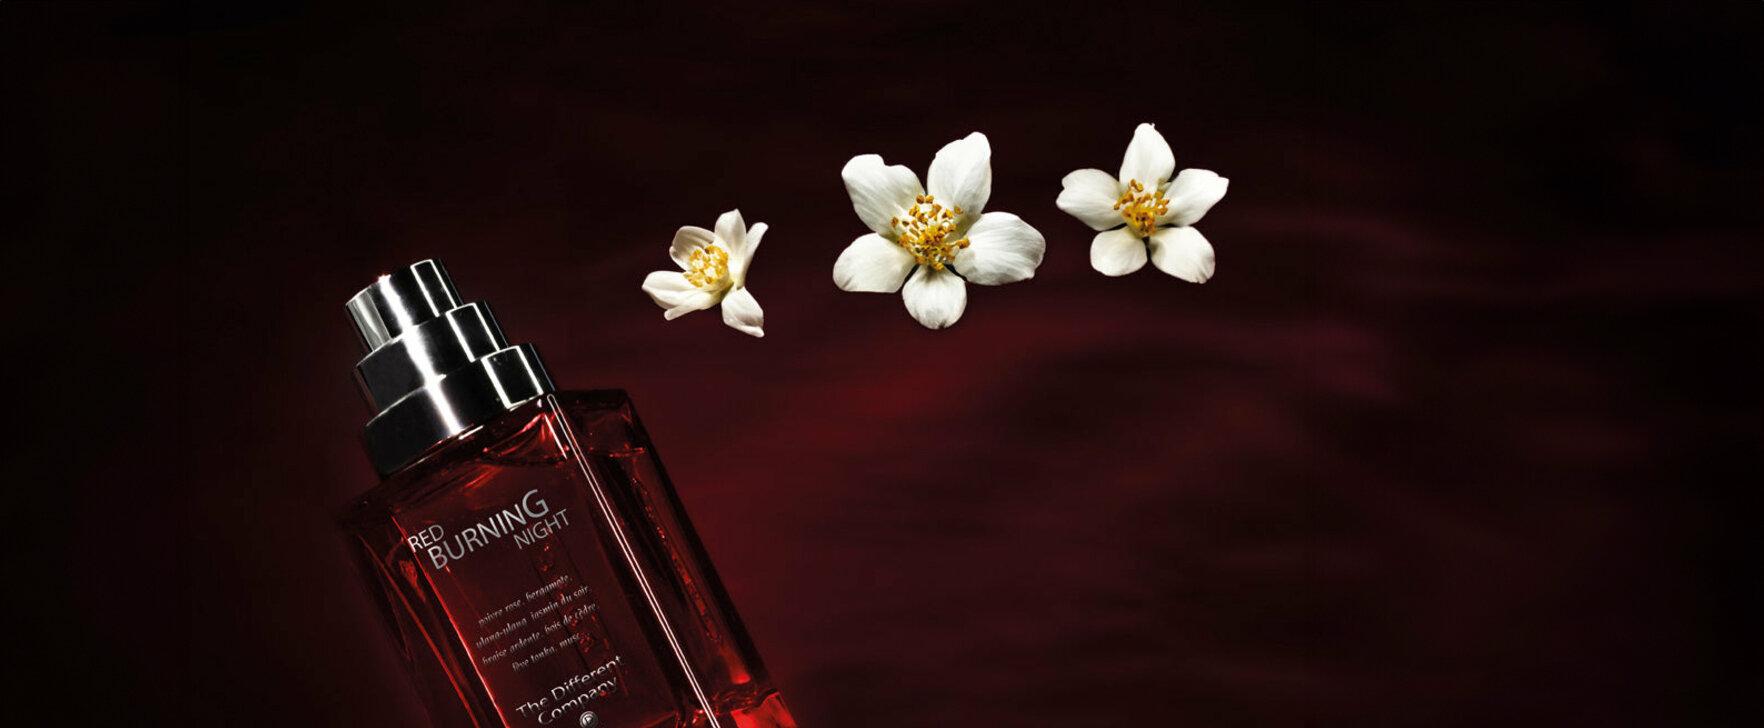 Fiery Temptation: The New Eau de Parfum "Red Burning Night" by The Different Company